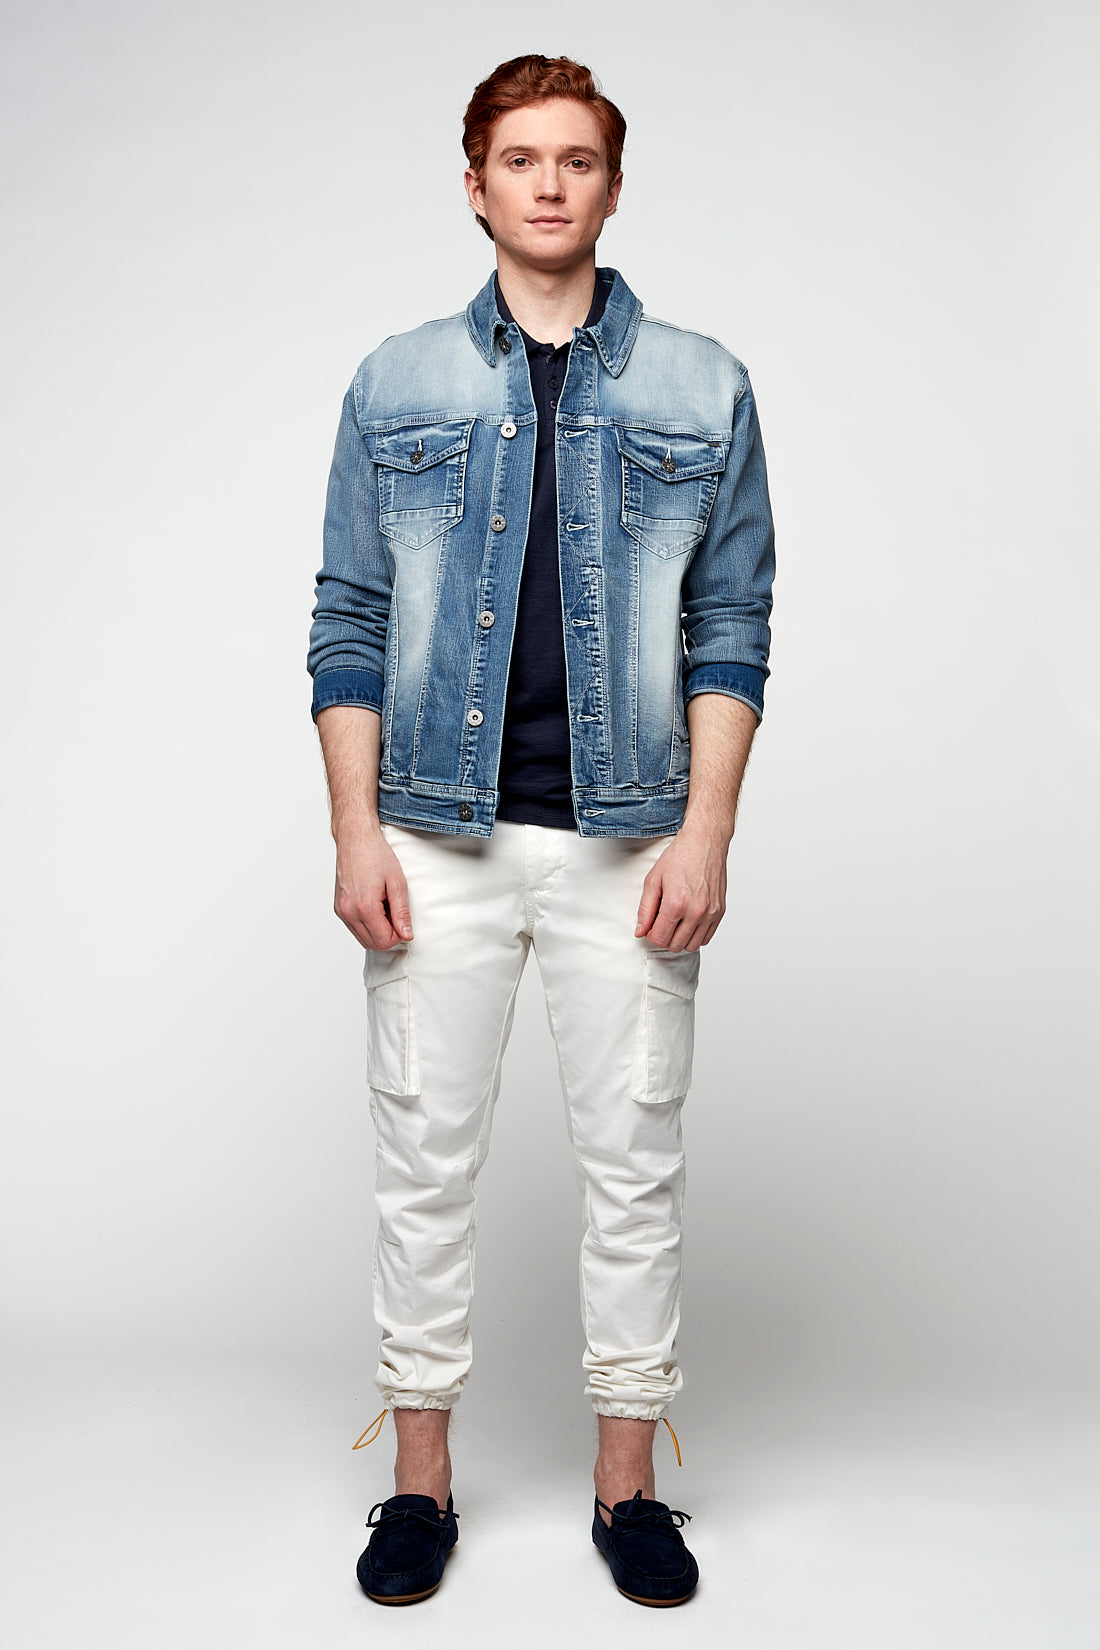 DEAN -  Slim Fit Cargo Chinos (Convertible Joggers) - Off White - DENIM SOCIETY™